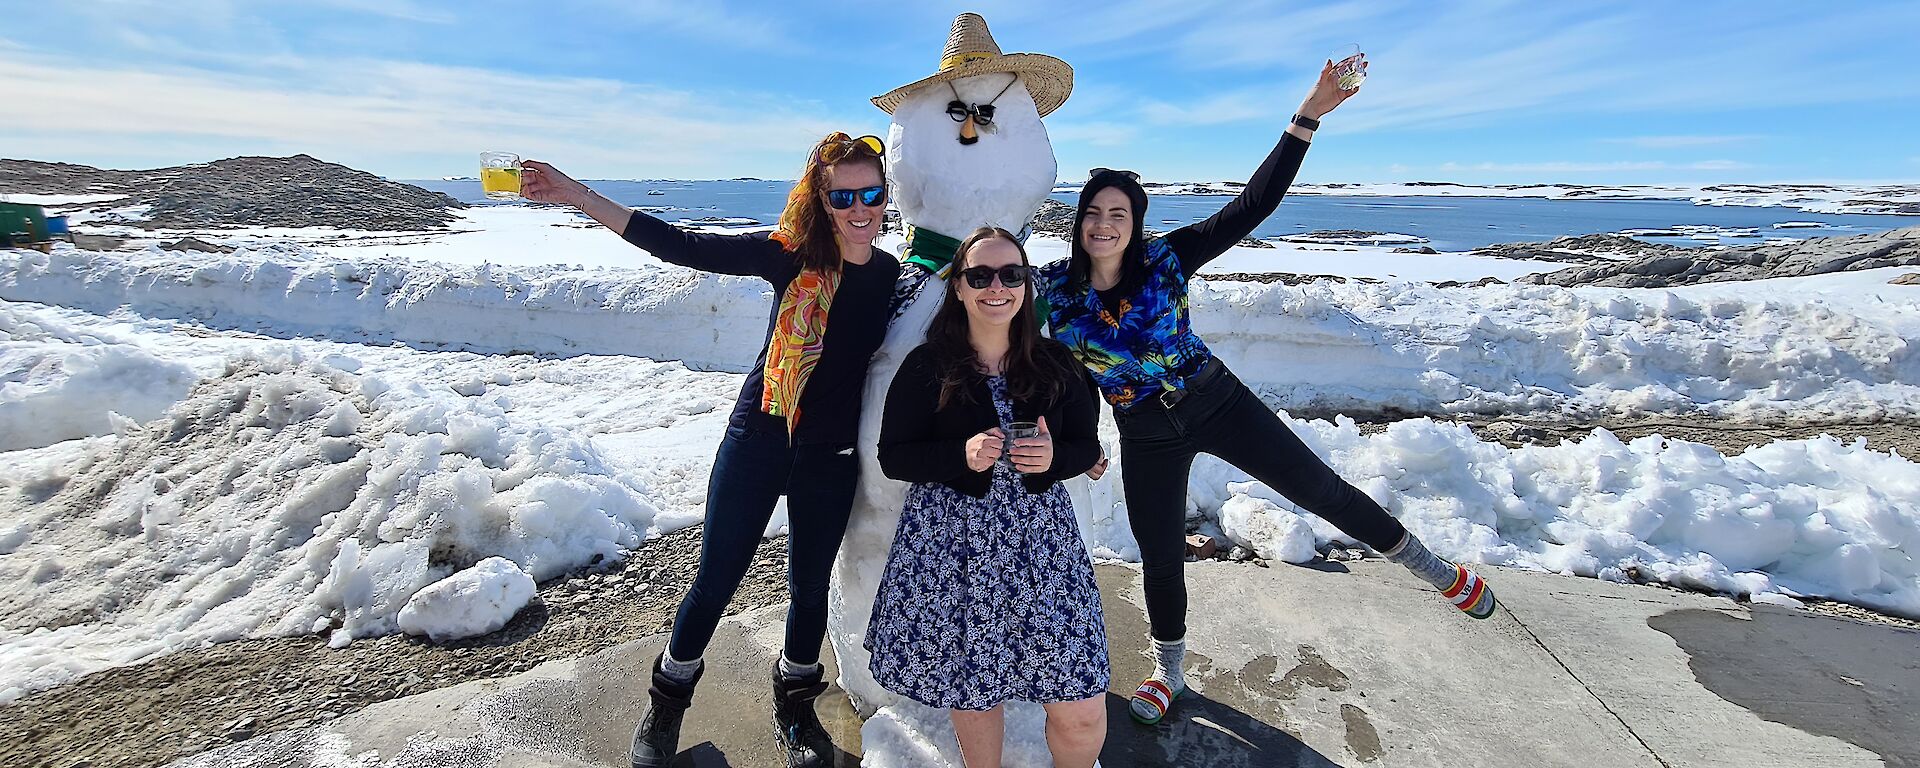 Three women stand in front of a snowman smiling.  Two are holding their drink glasses up in the air.  the snowman has a hat and sunglasses on.